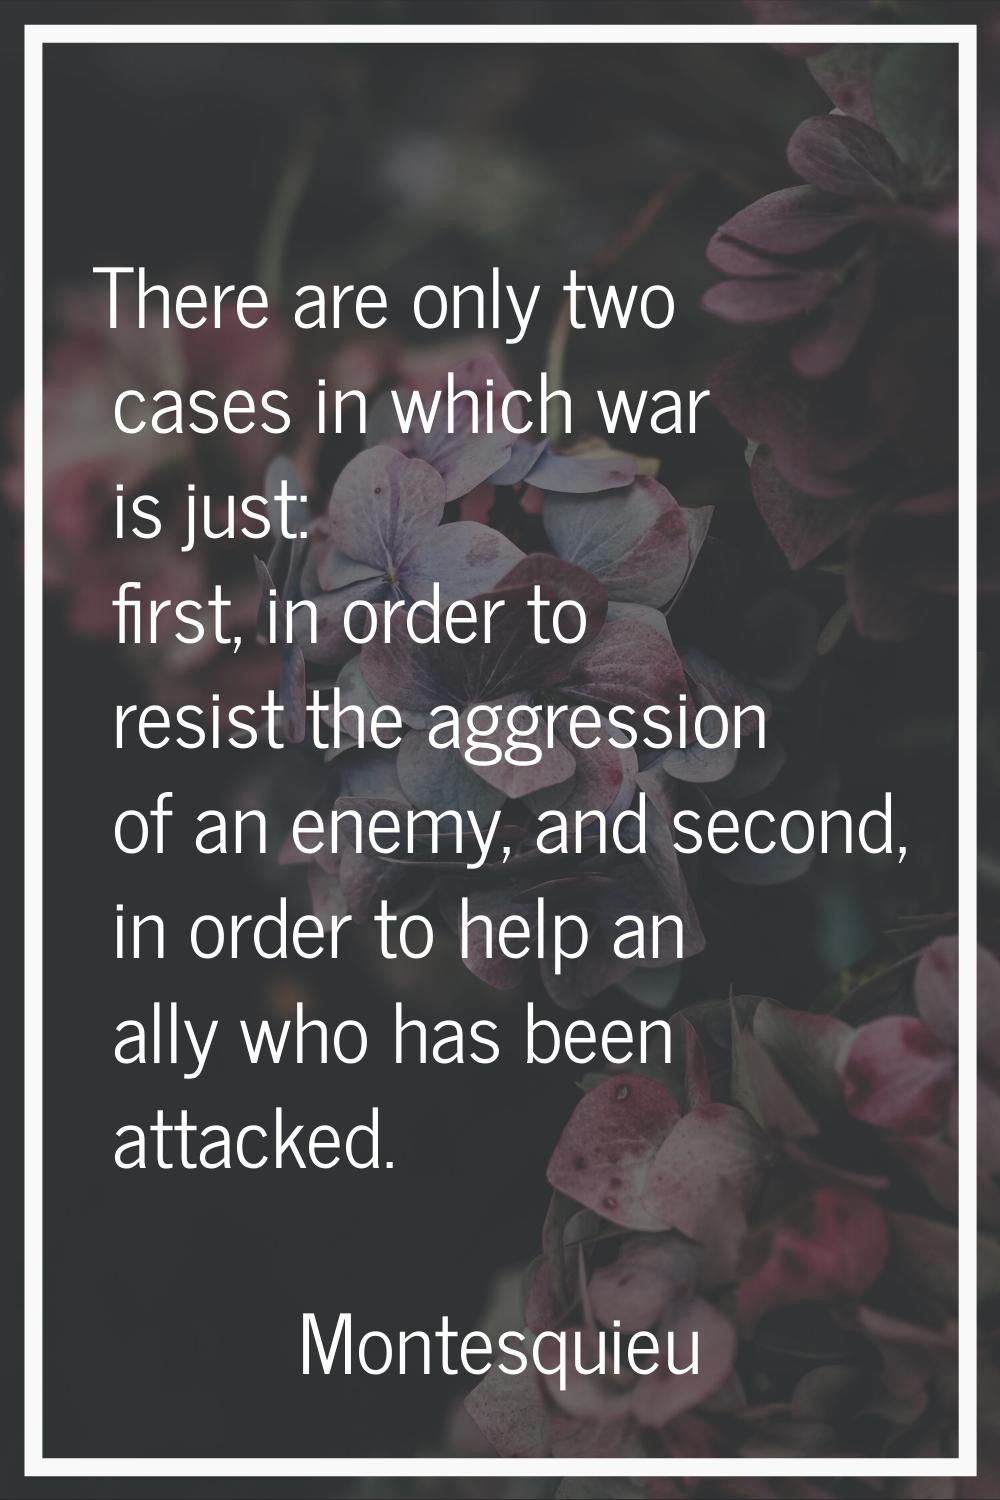 There are only two cases in which war is just: first, in order to resist the aggression of an enemy